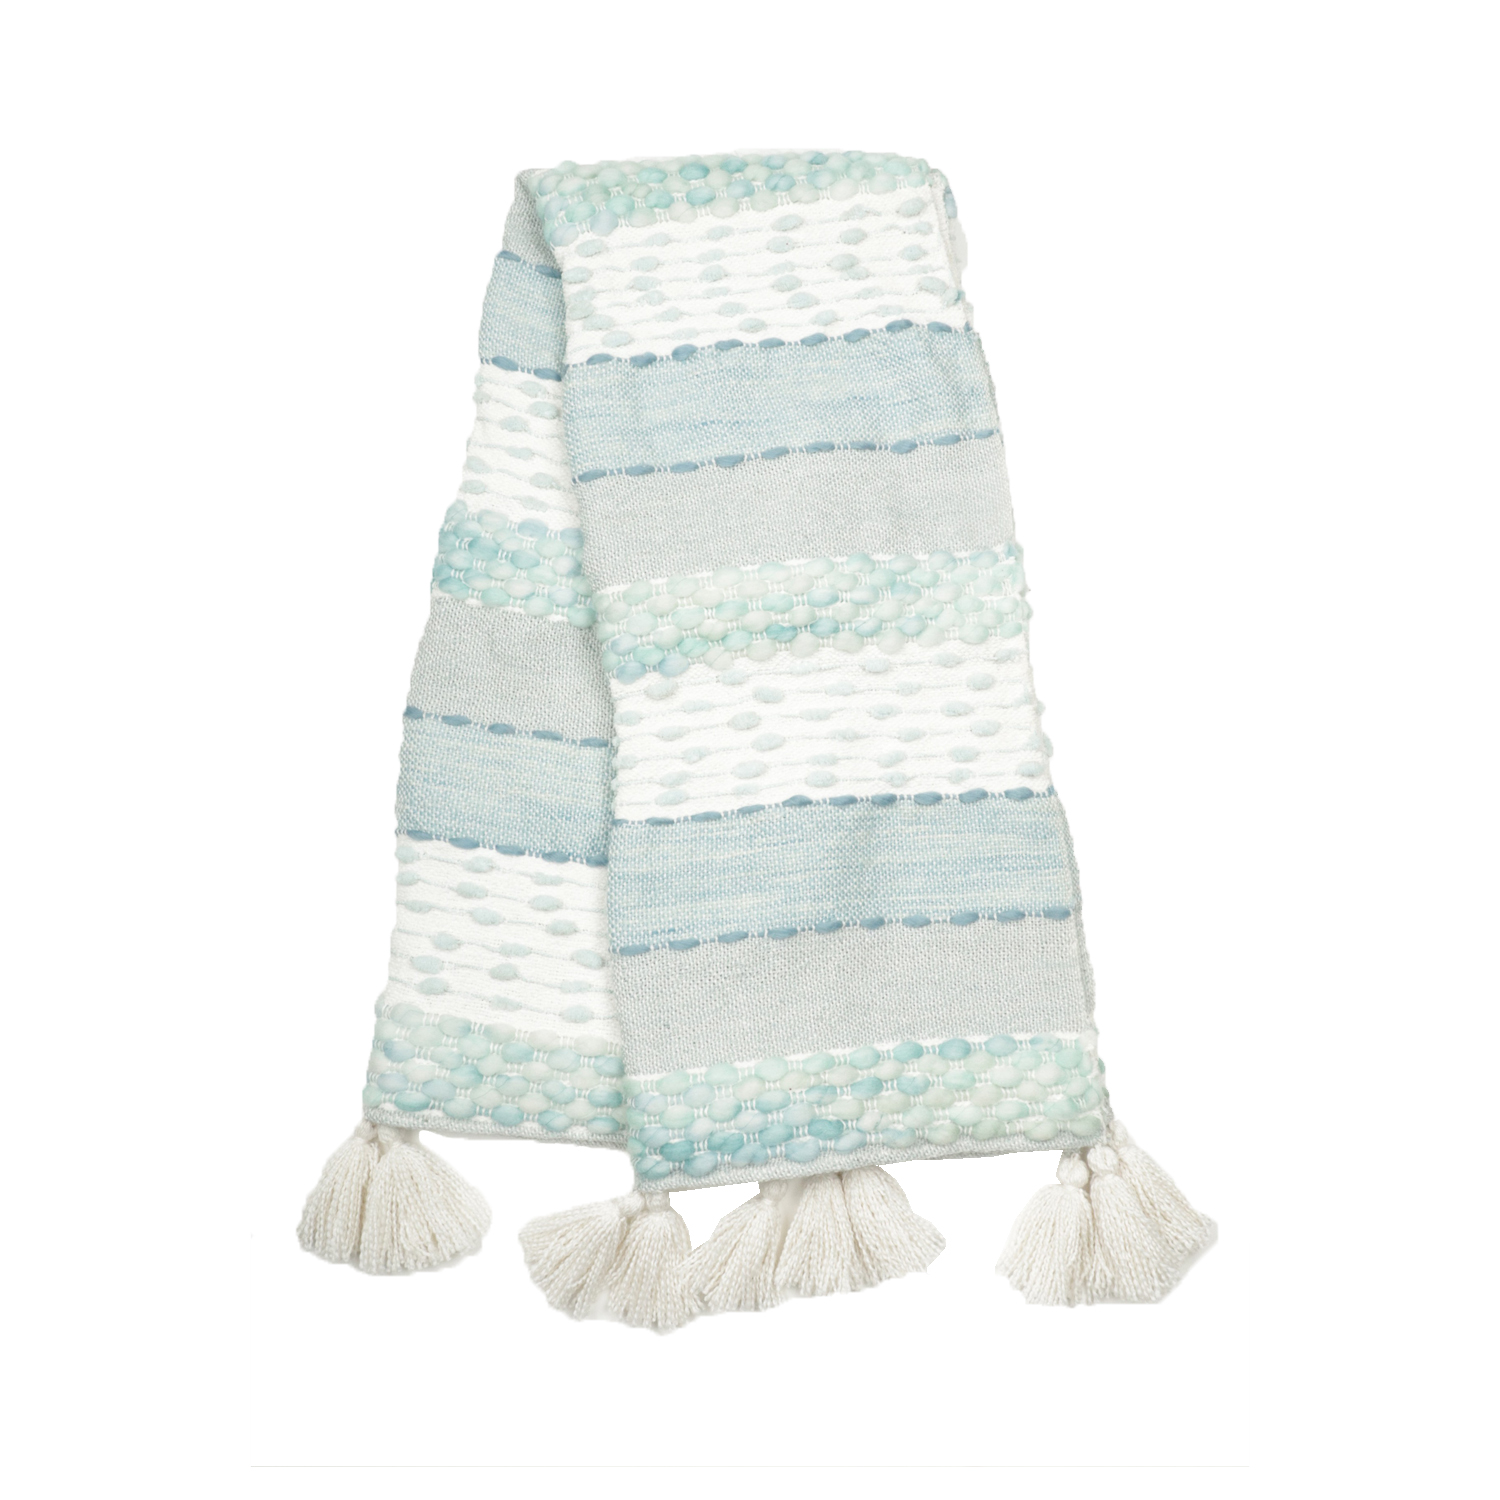 Woven Throw With Tassels Nautical Blue 125x150cm Gift